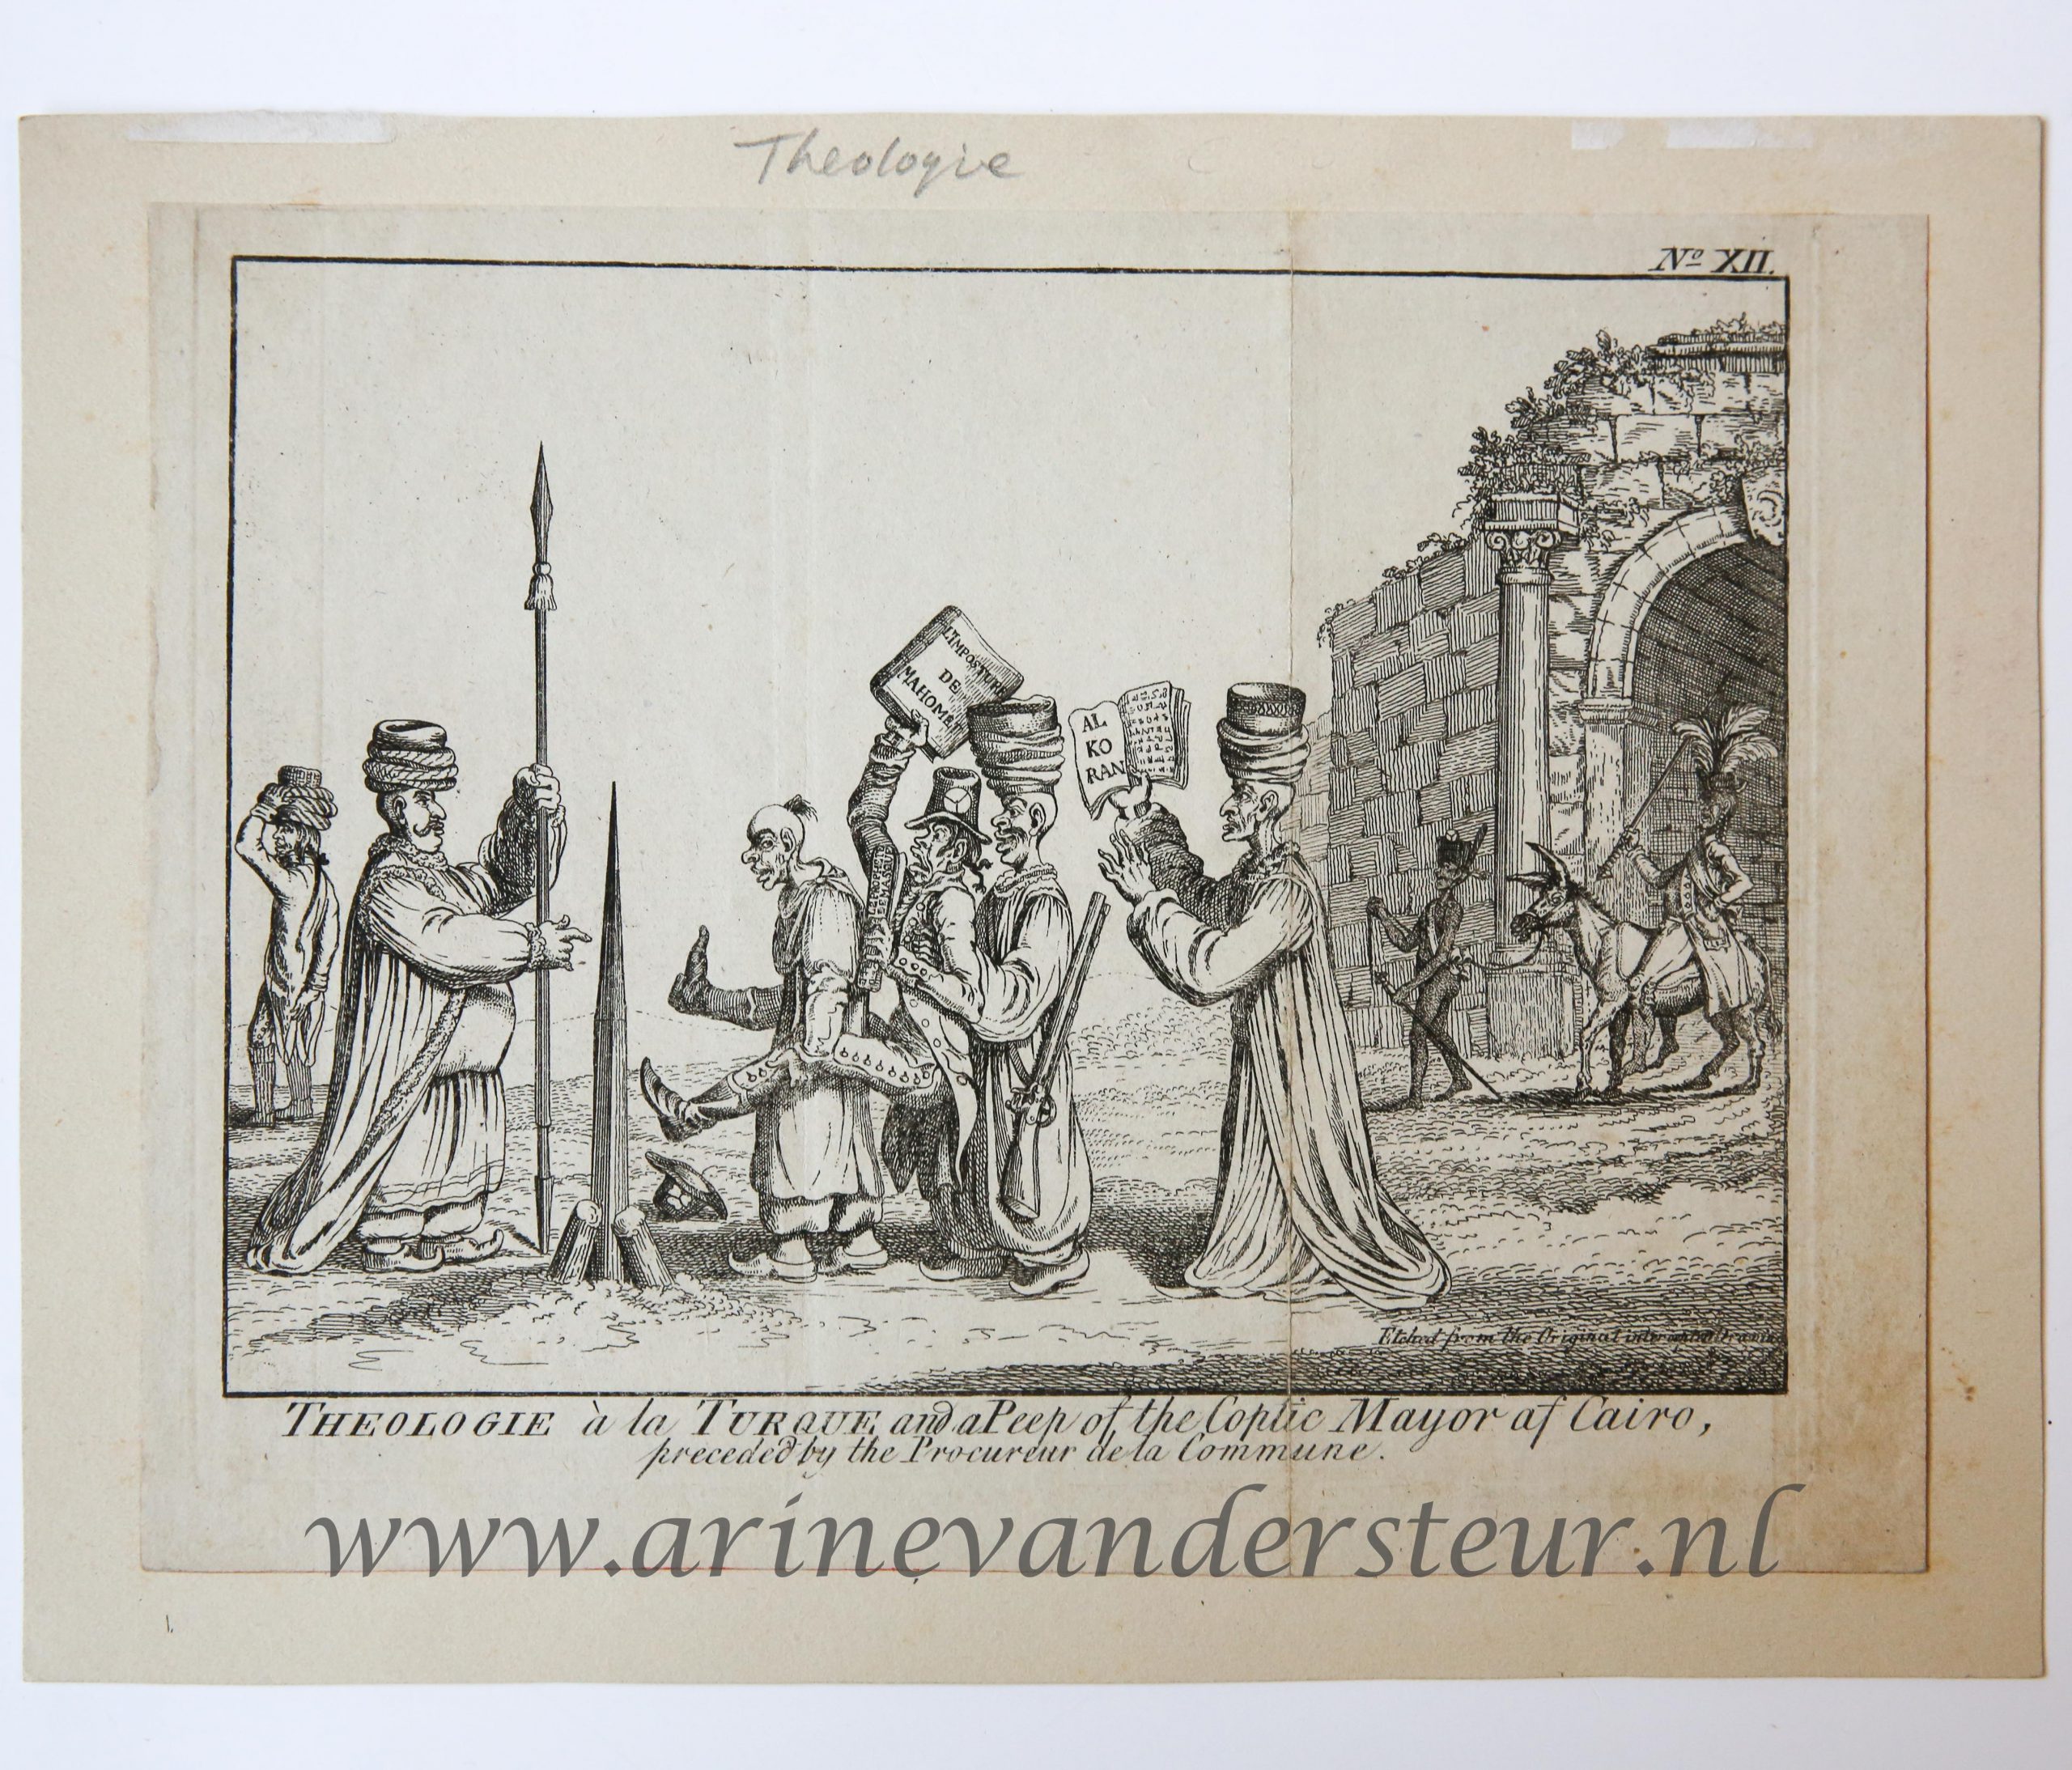 [Satirical print/spotprent] Theologie a la Turque and a peep pf the Coptic Mayor of Cairo, preceded by the procureur de la Commune. 1 p. Man with several hats is holding a book with the text "Al Koran", other man with high hat and being carried is holding a book: l'imposture de Mahomet.